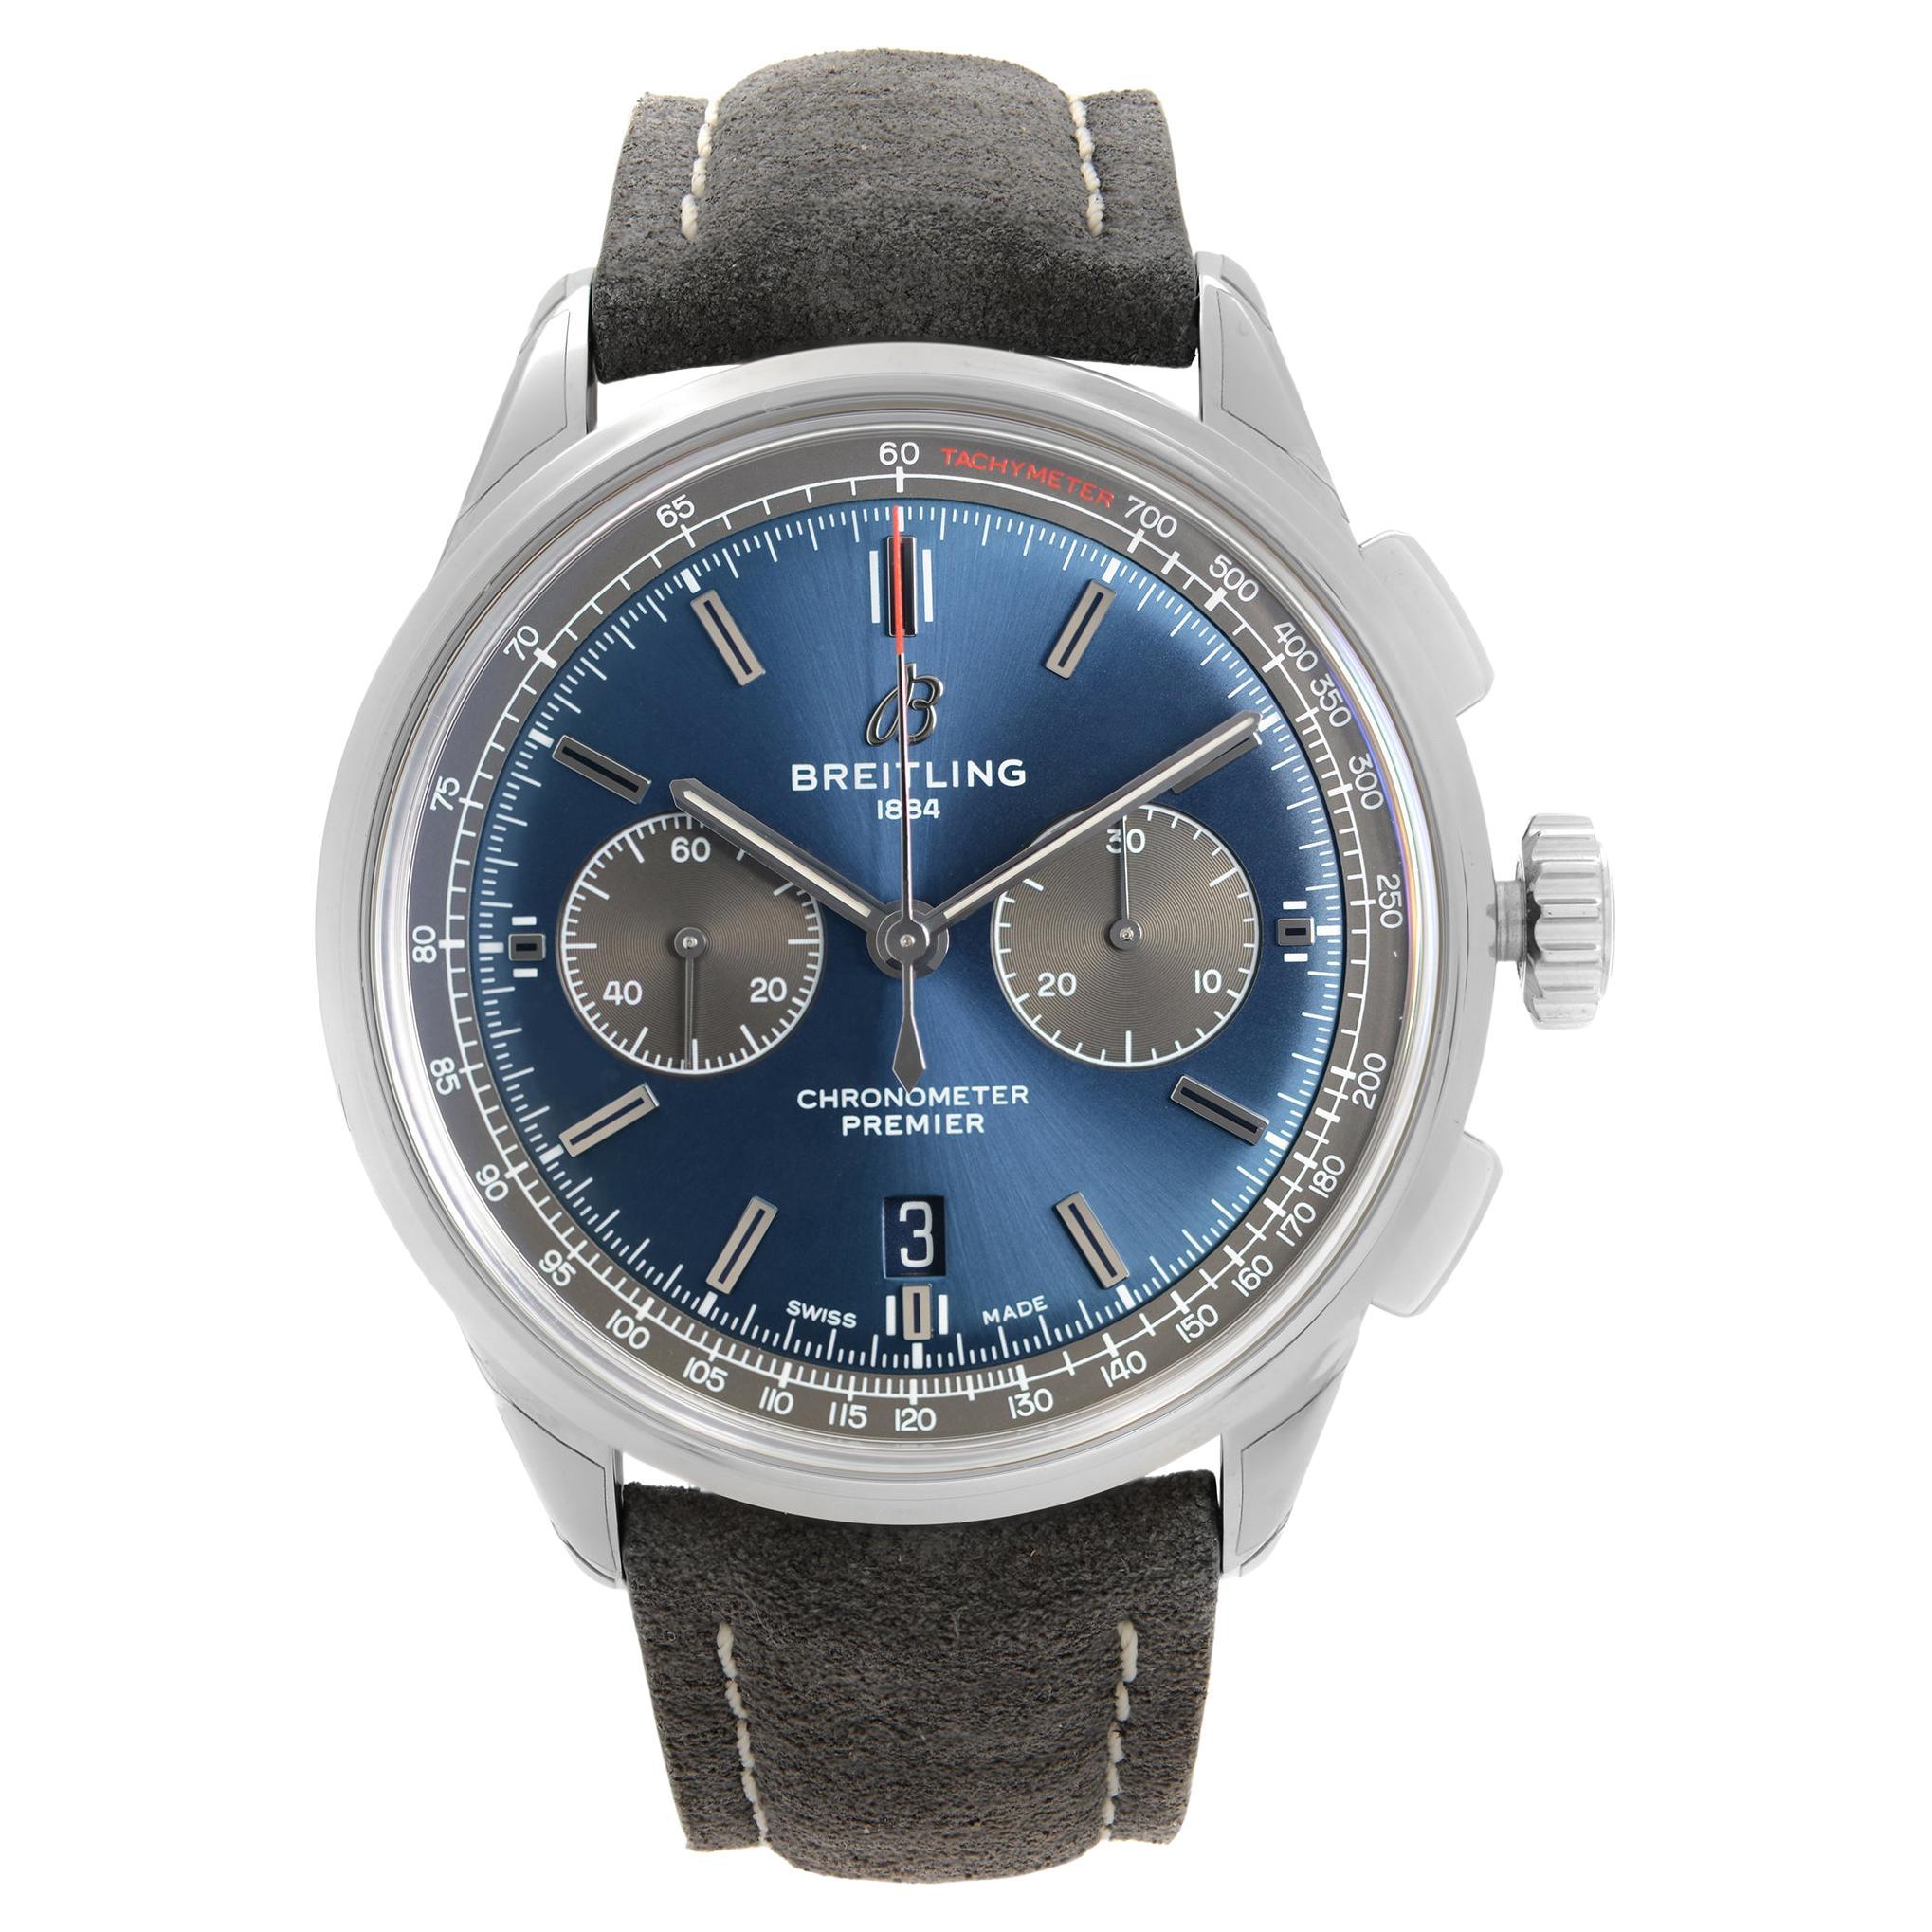 Breitling Premier B01 Steel Chronograph Blue Dial Automatic Watch AB0118A61C1X4 For Sale